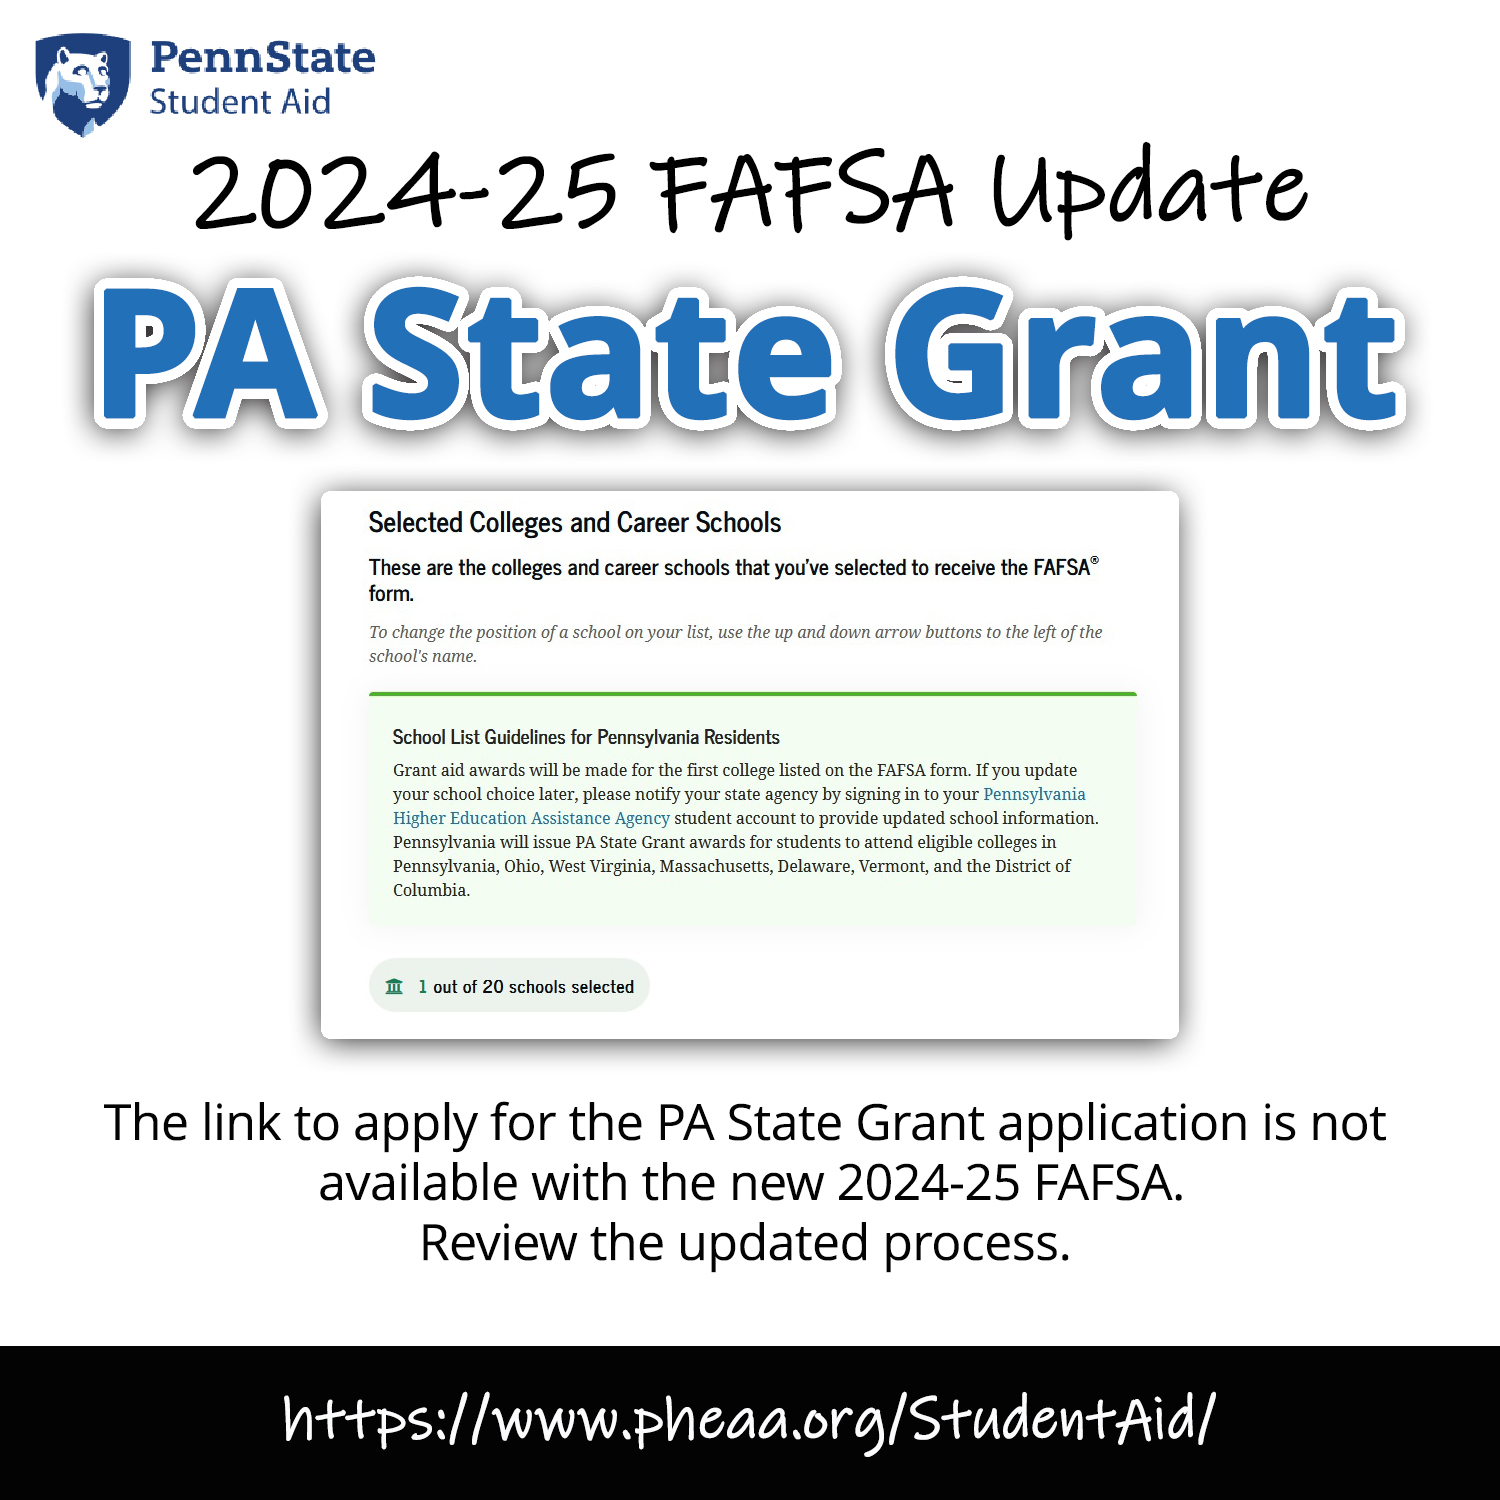 PHEAA Grant link from 2024-25 FAFSA